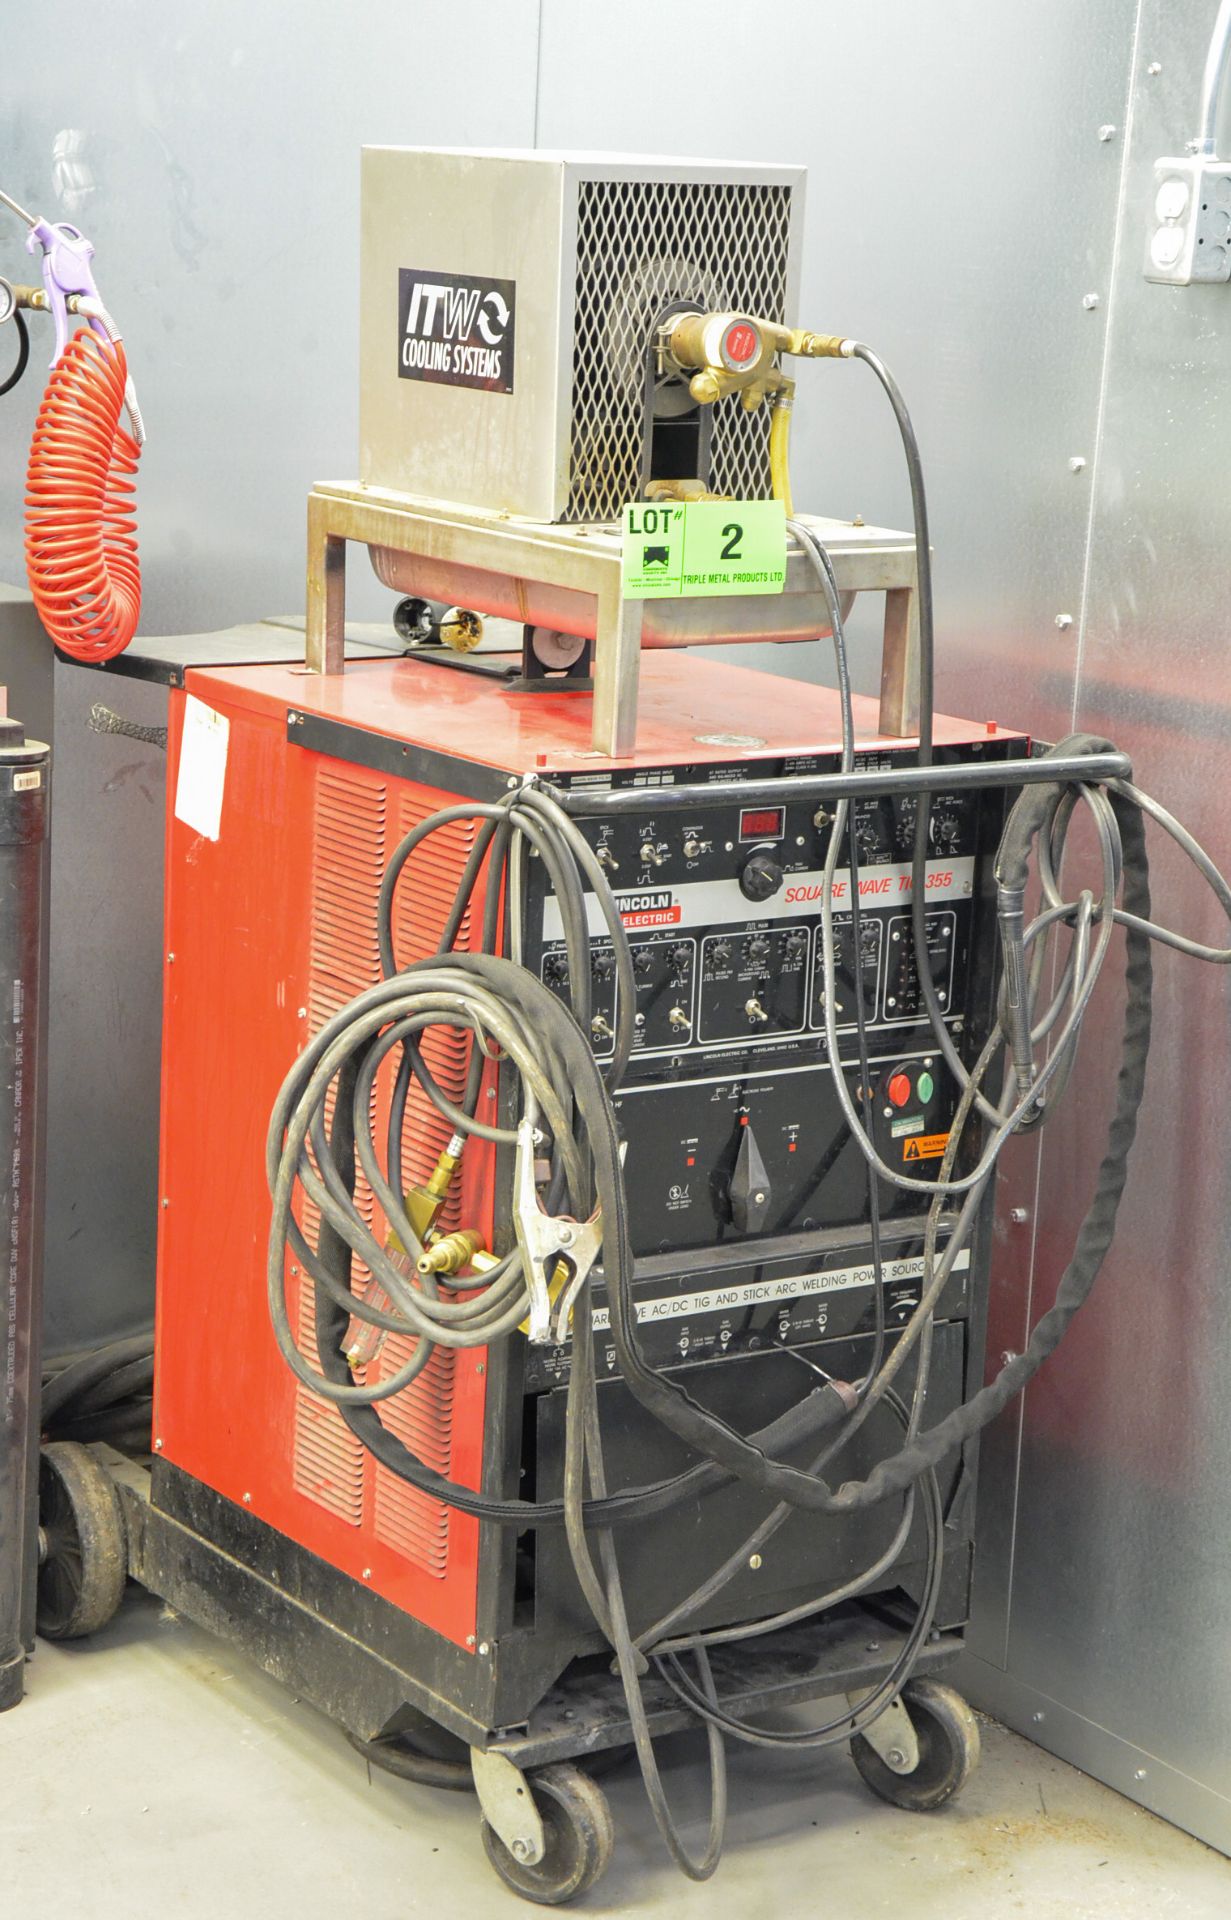 LINCOLN ELECTRIC SQUARE WAVE TIG-355 DIGITAL TIG WELDER WITH CABLES & GUN, ITW COOLING SYSTEMS